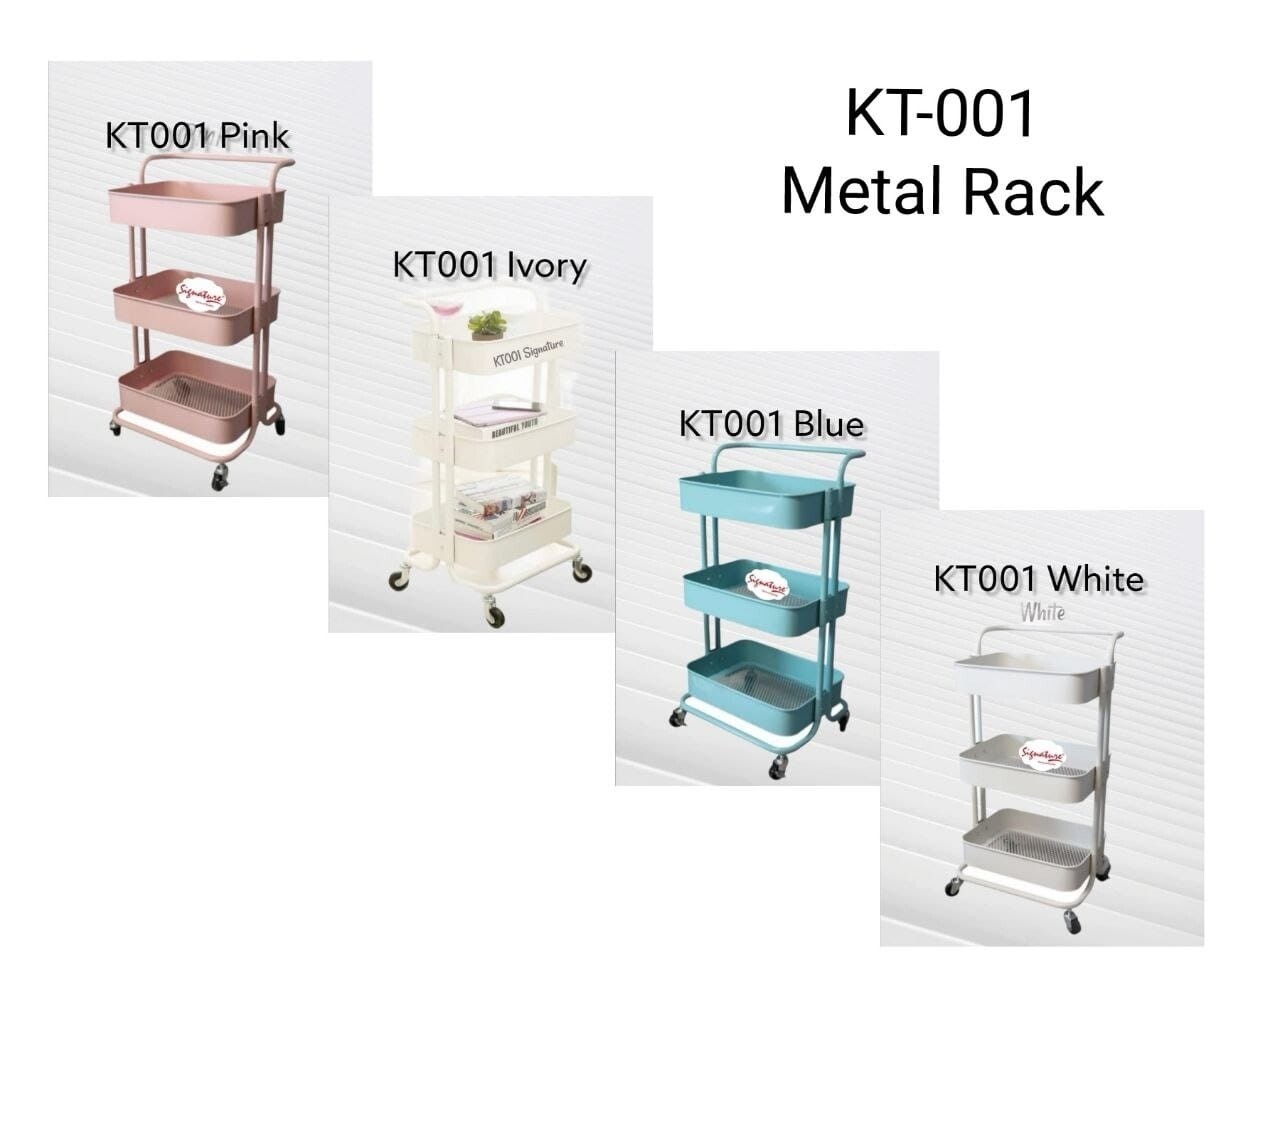 Signature Kitchen rack metal rack with handle and wheels KT001 PINK